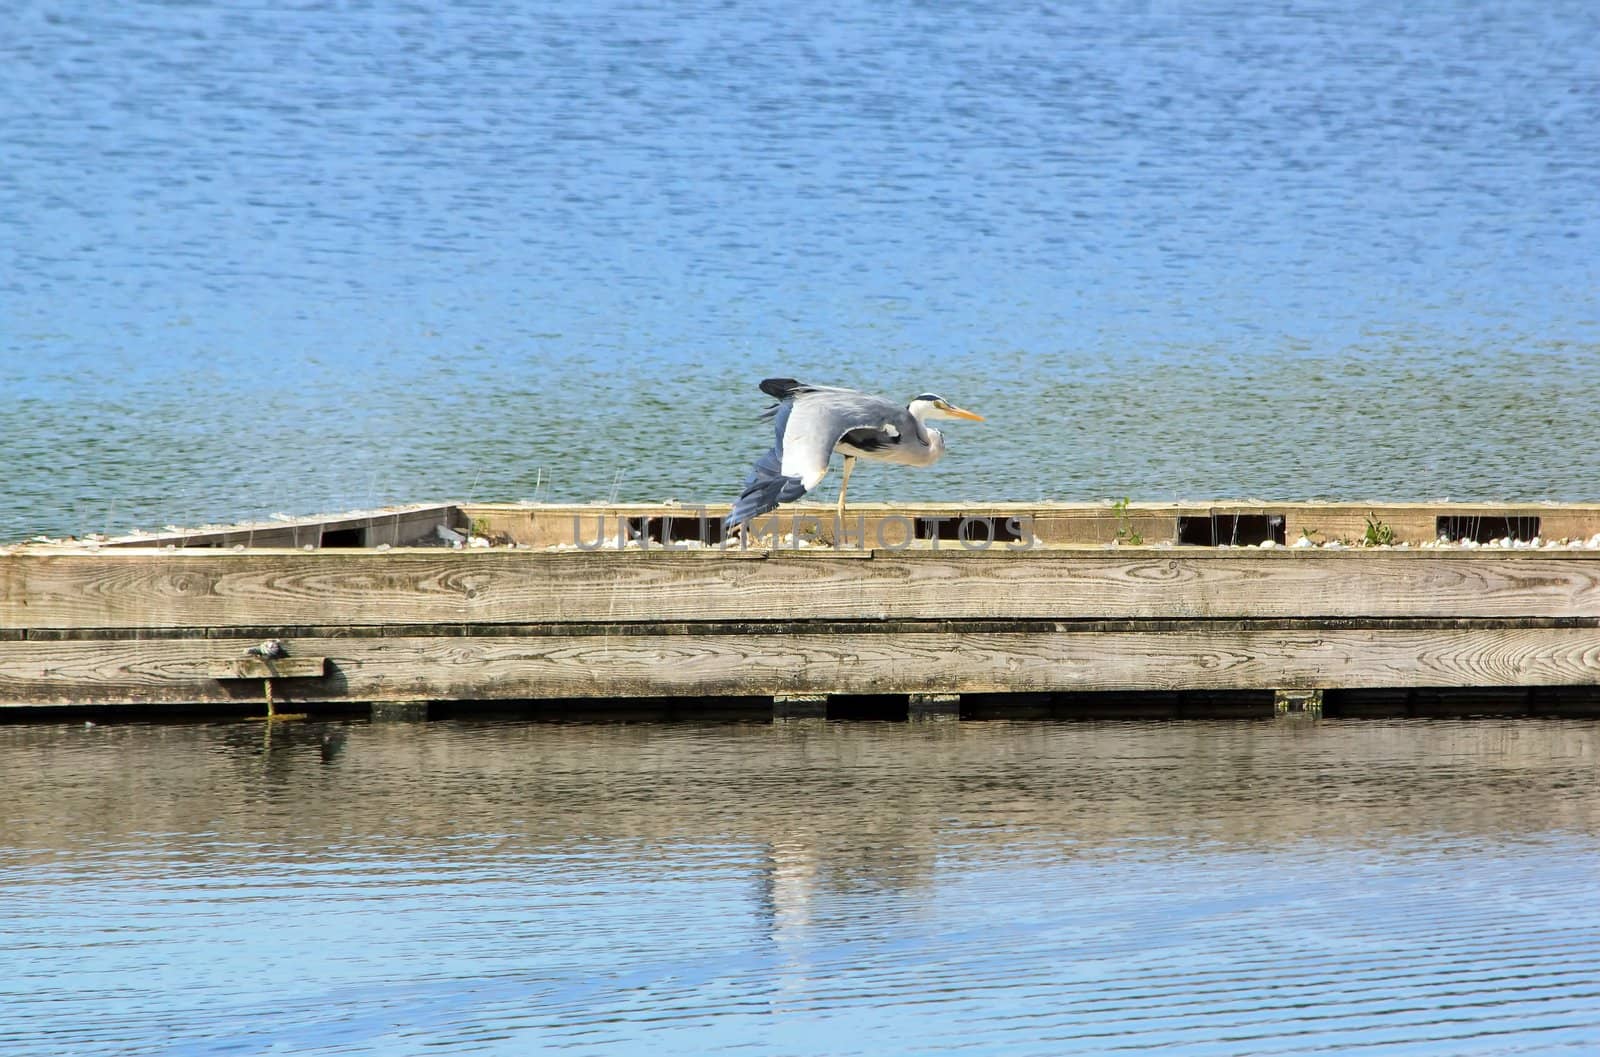 heron stretching on a barge, banks of the Marne in France Nature Reserve